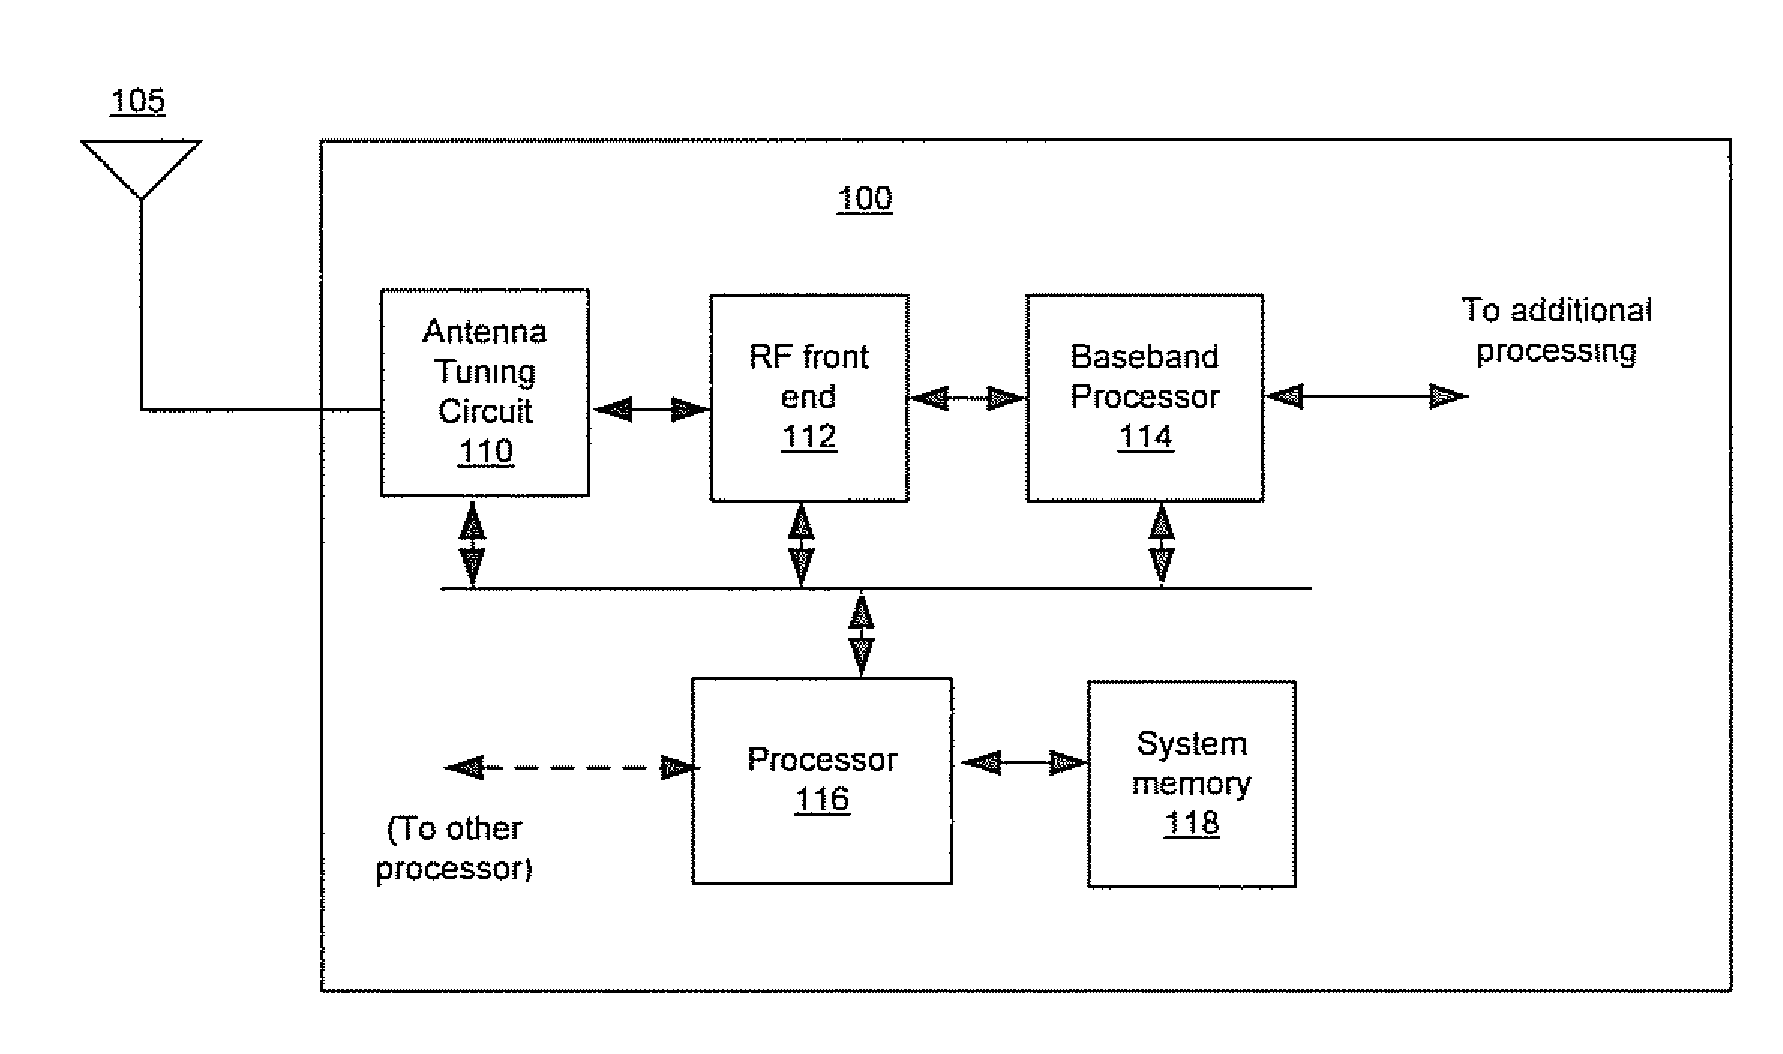 Method and system for dynamically tuning and calibrating an antenna using an on-chip digitally controlled array of capacitors